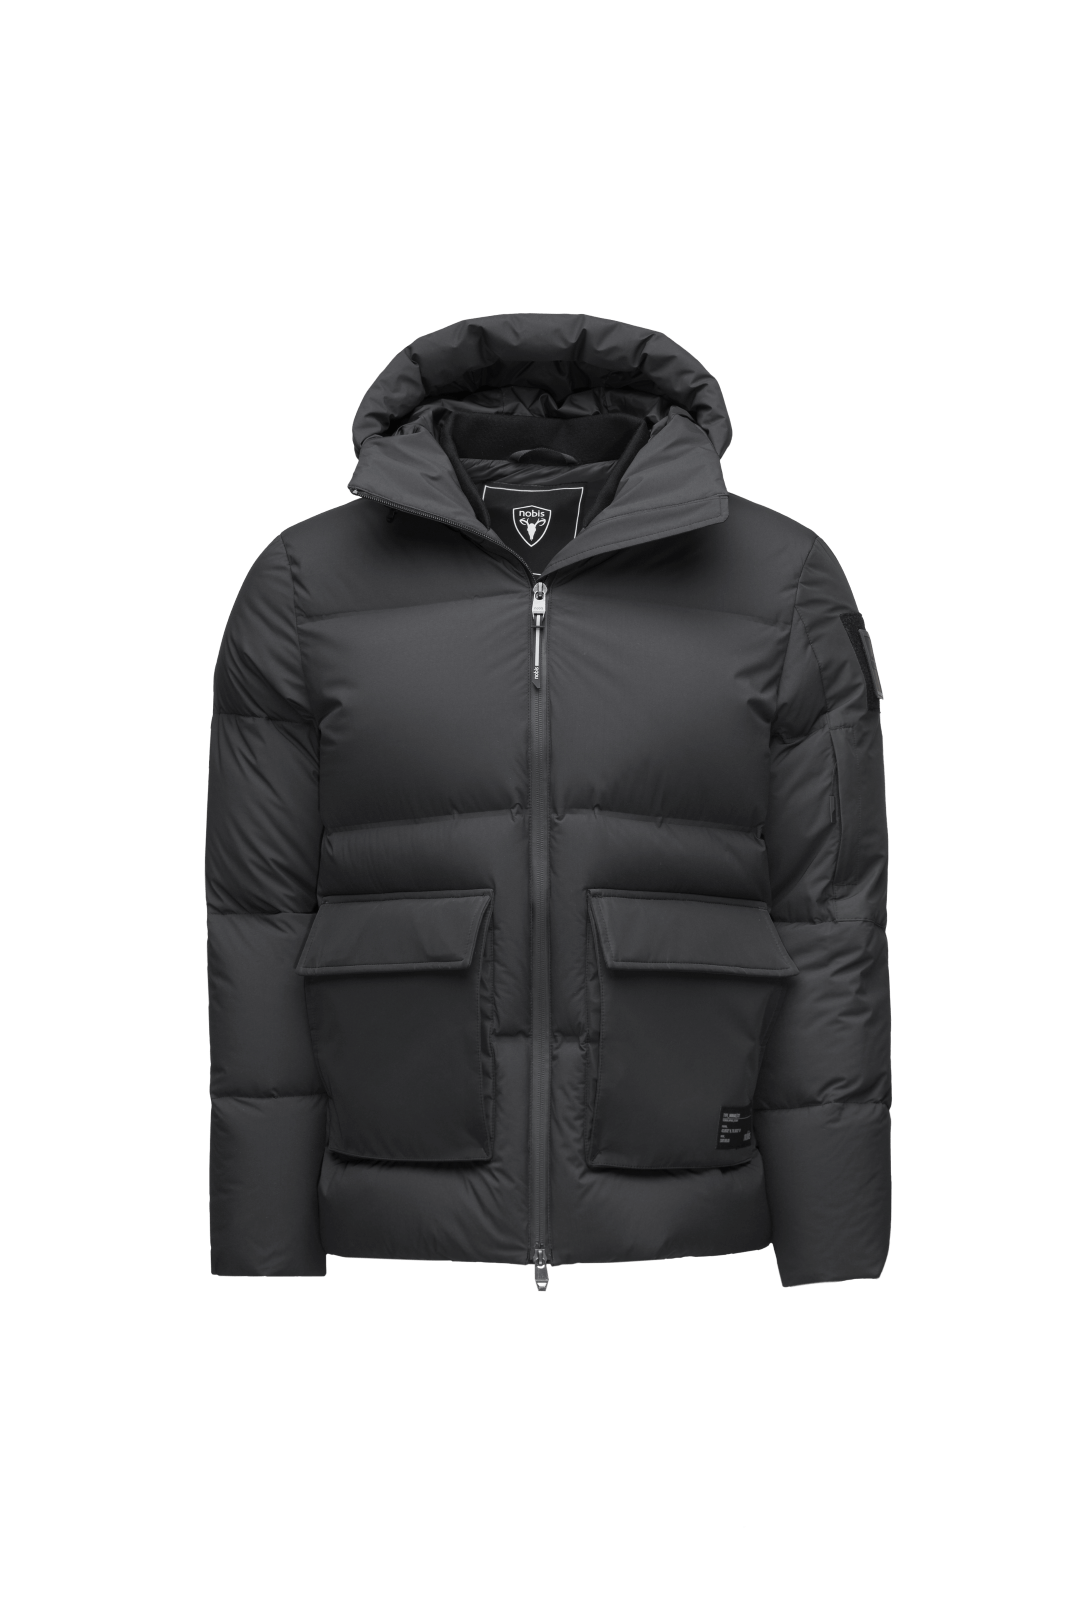 Supra Men's Performance Puffer in hip length, Technical Taffeta and 3-Ply Micro Denier fabrication, Premium Canadian White Duck Down insulation, non-removable down filled hood, centre front two-way zipper, flap pockets at waist, and zipper pocket at left bicep, in Black